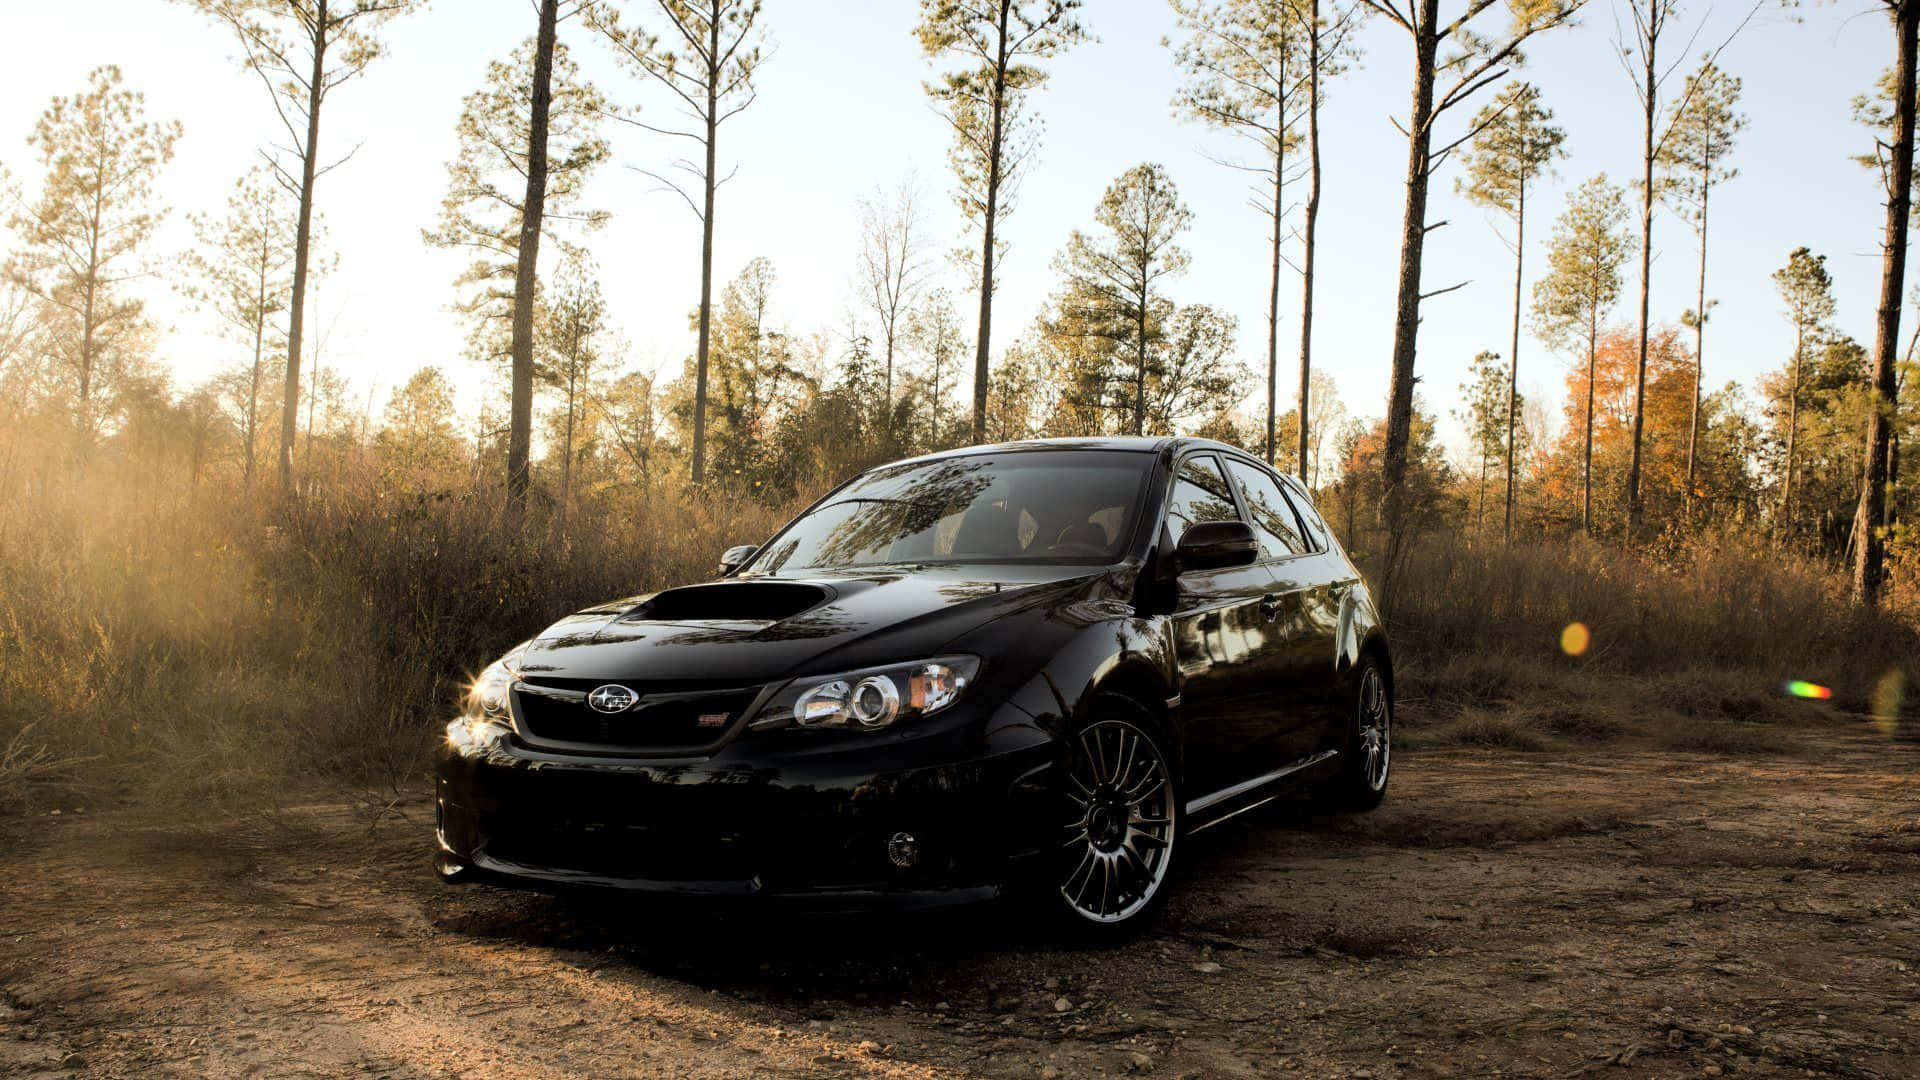 A Stunning Image Of A Subaru Wrx In Its Full Glory Wallpaper